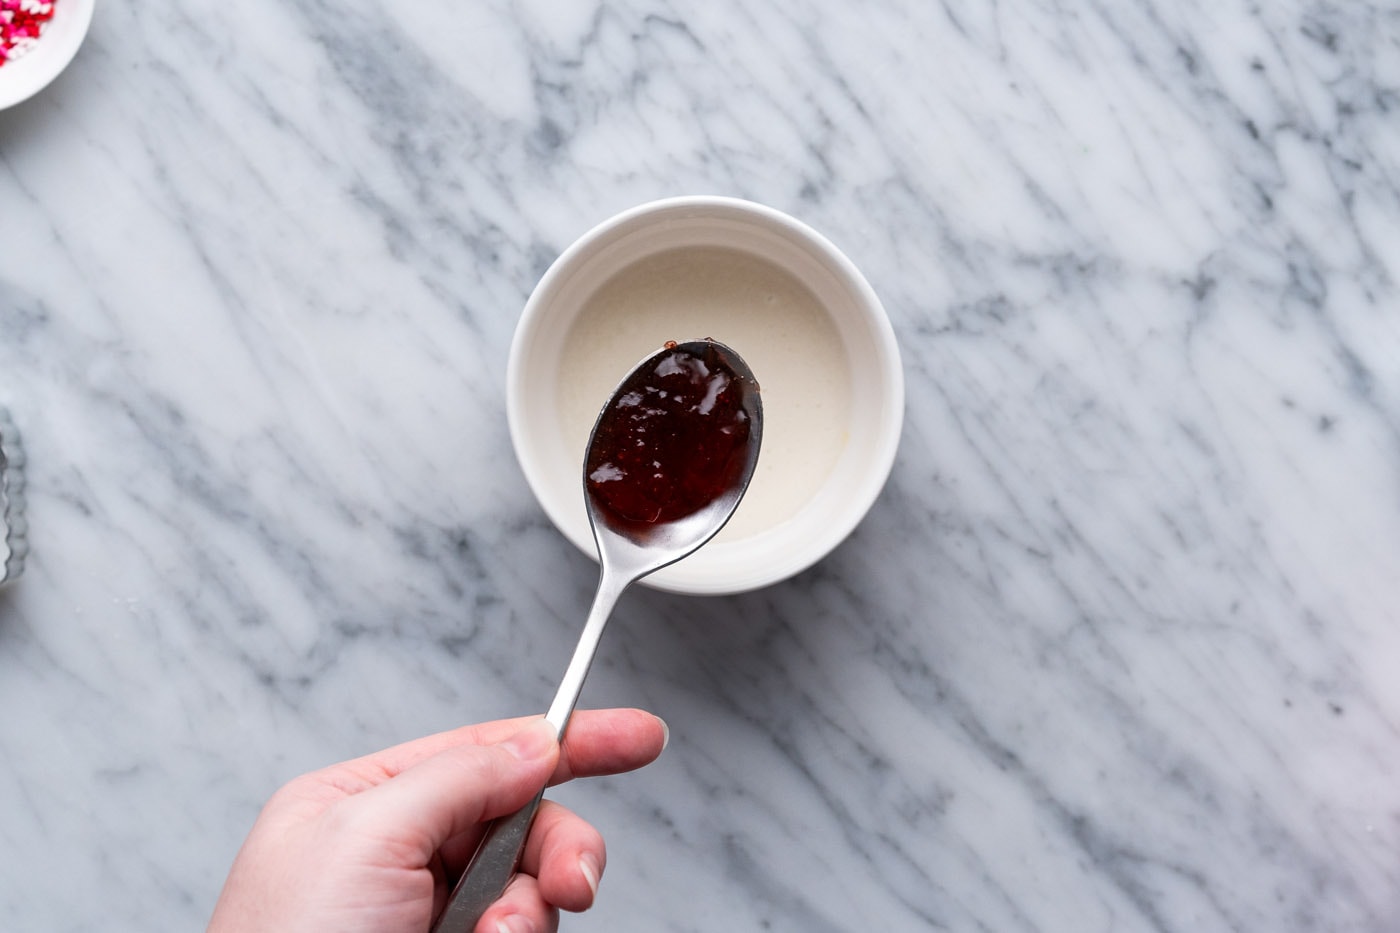 spoonful of strawberry jam over top of glaze